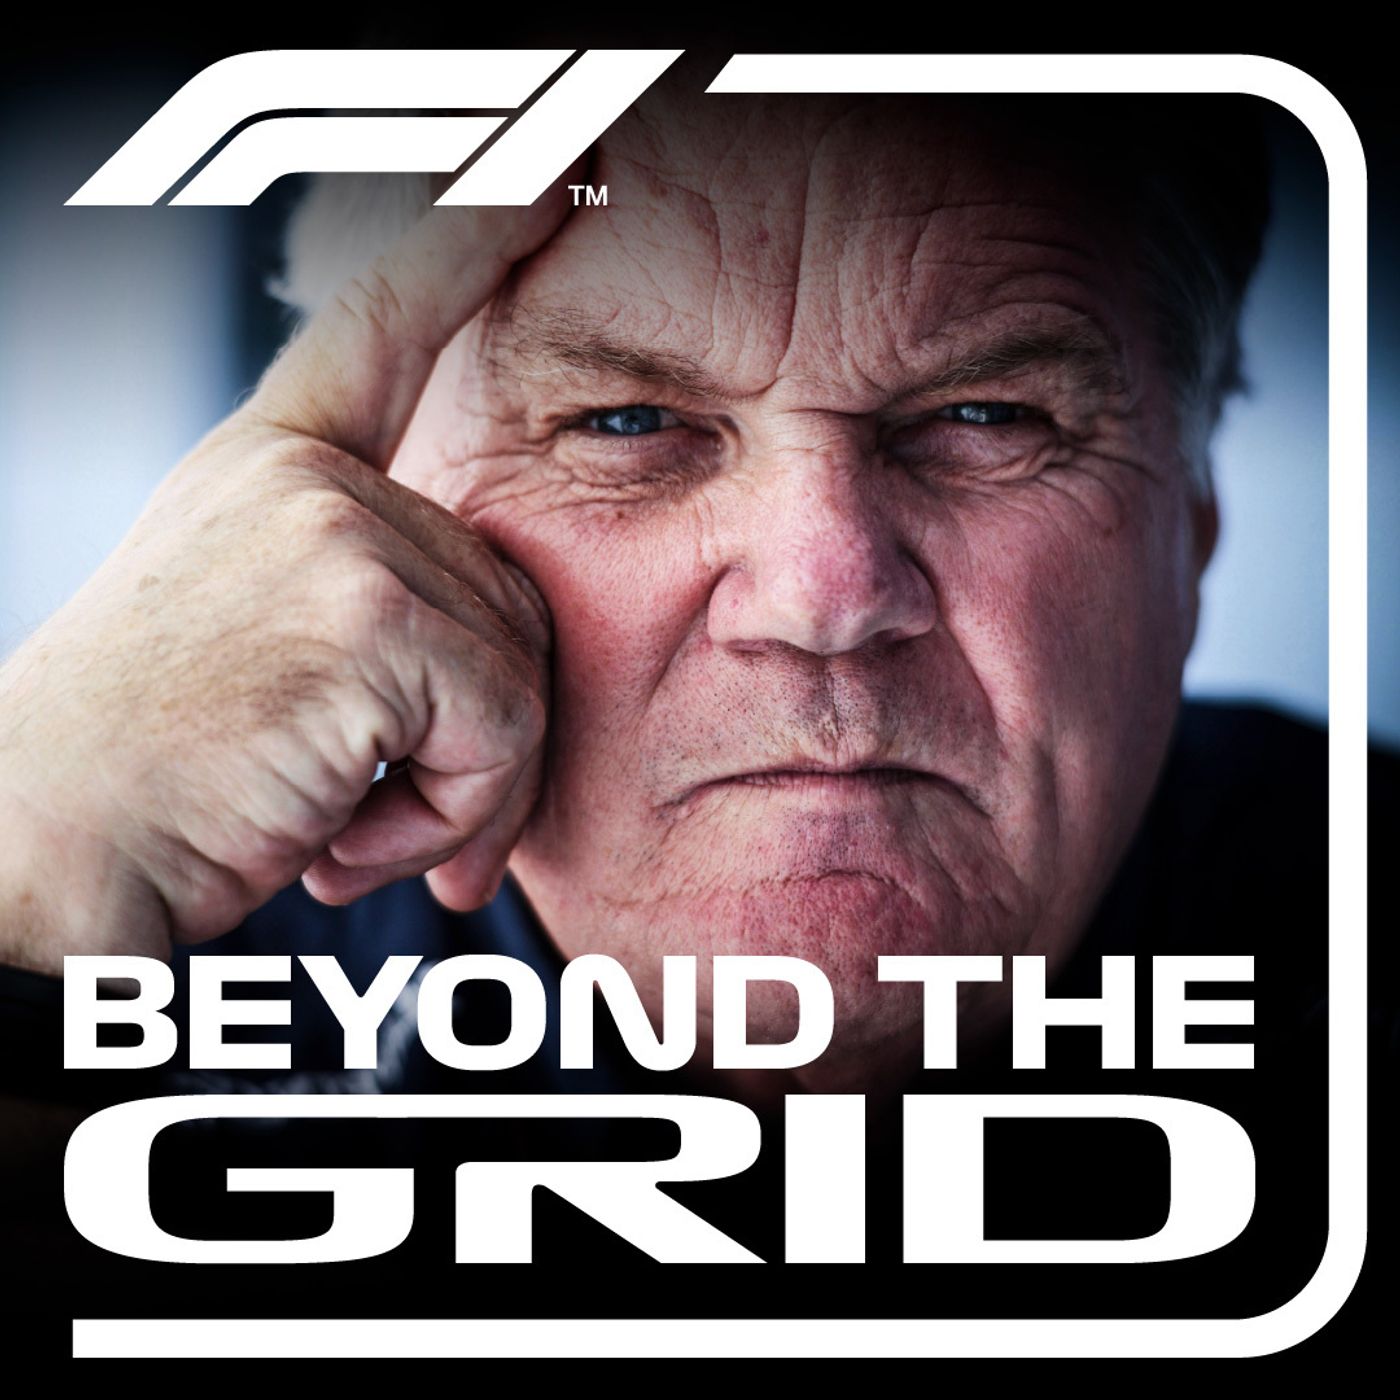 Sir Patrick Head looks back on a life at Williams